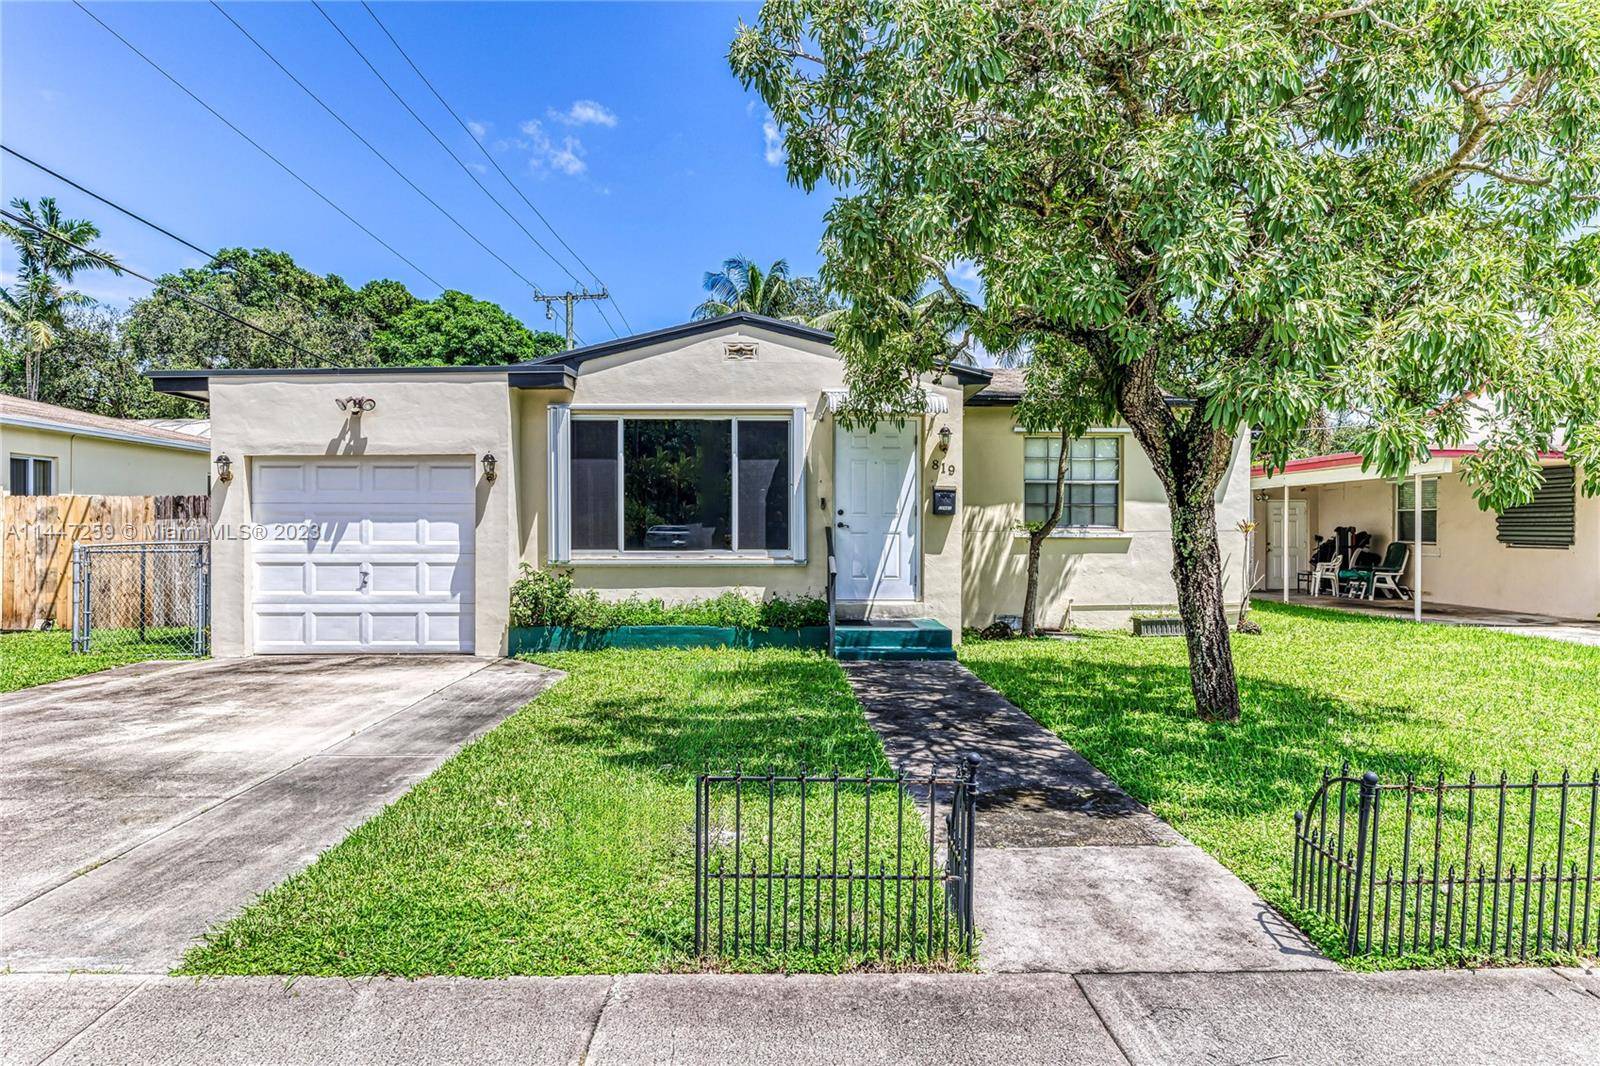 Charming 3 bed, 2 bath home with a split bedroom floor plan awaits you !